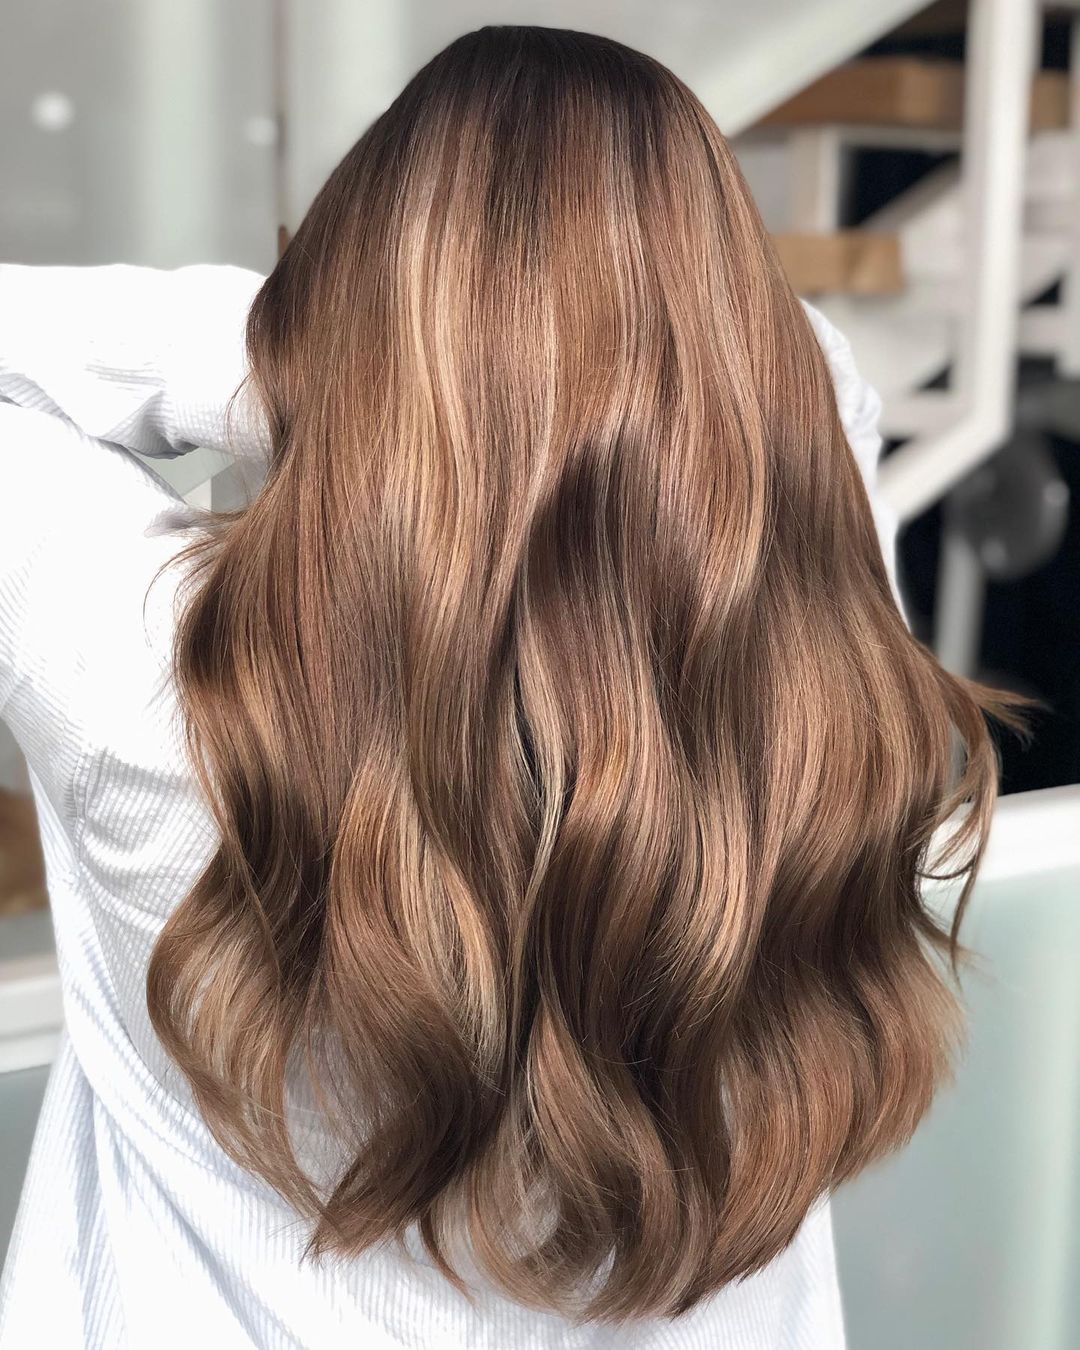 sandy brown hair with blonde highlights